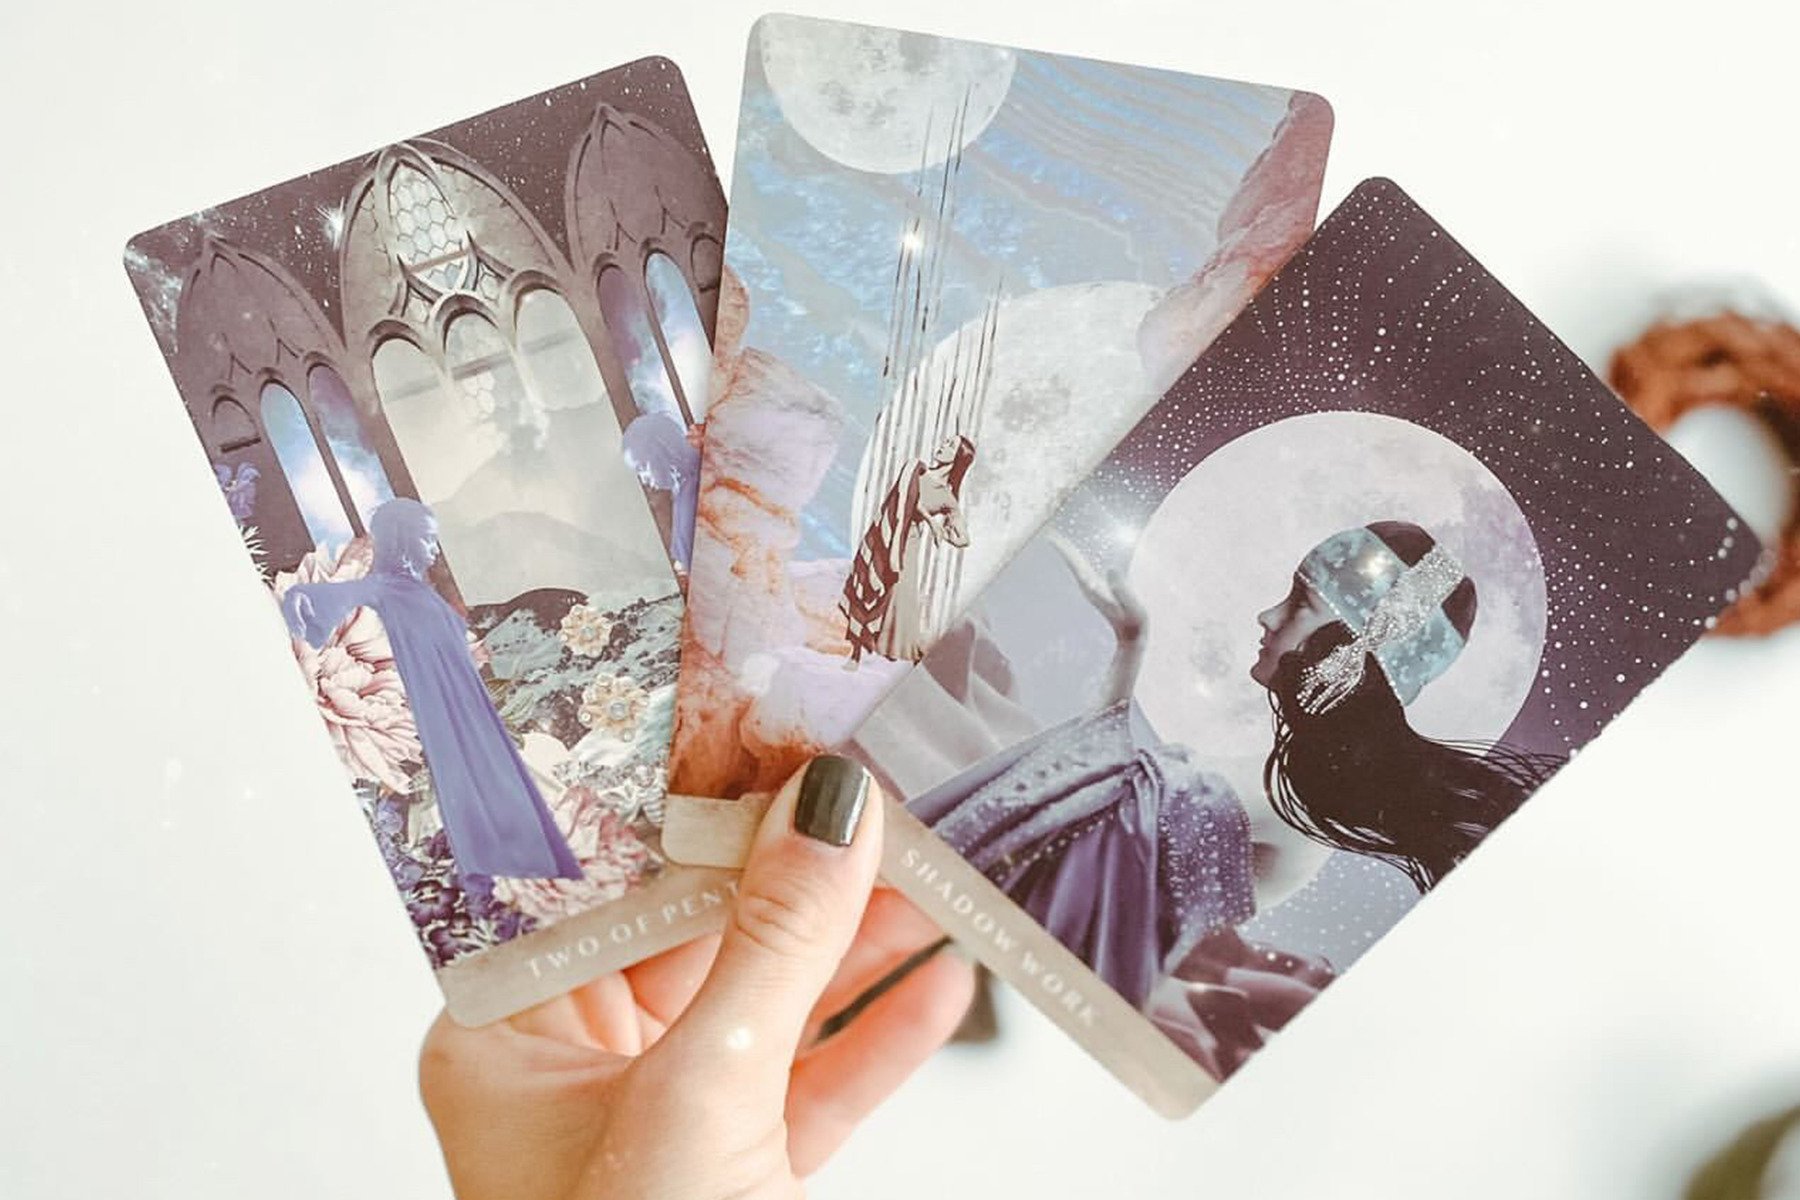 Can You Buy Your Own Tarot Deck?